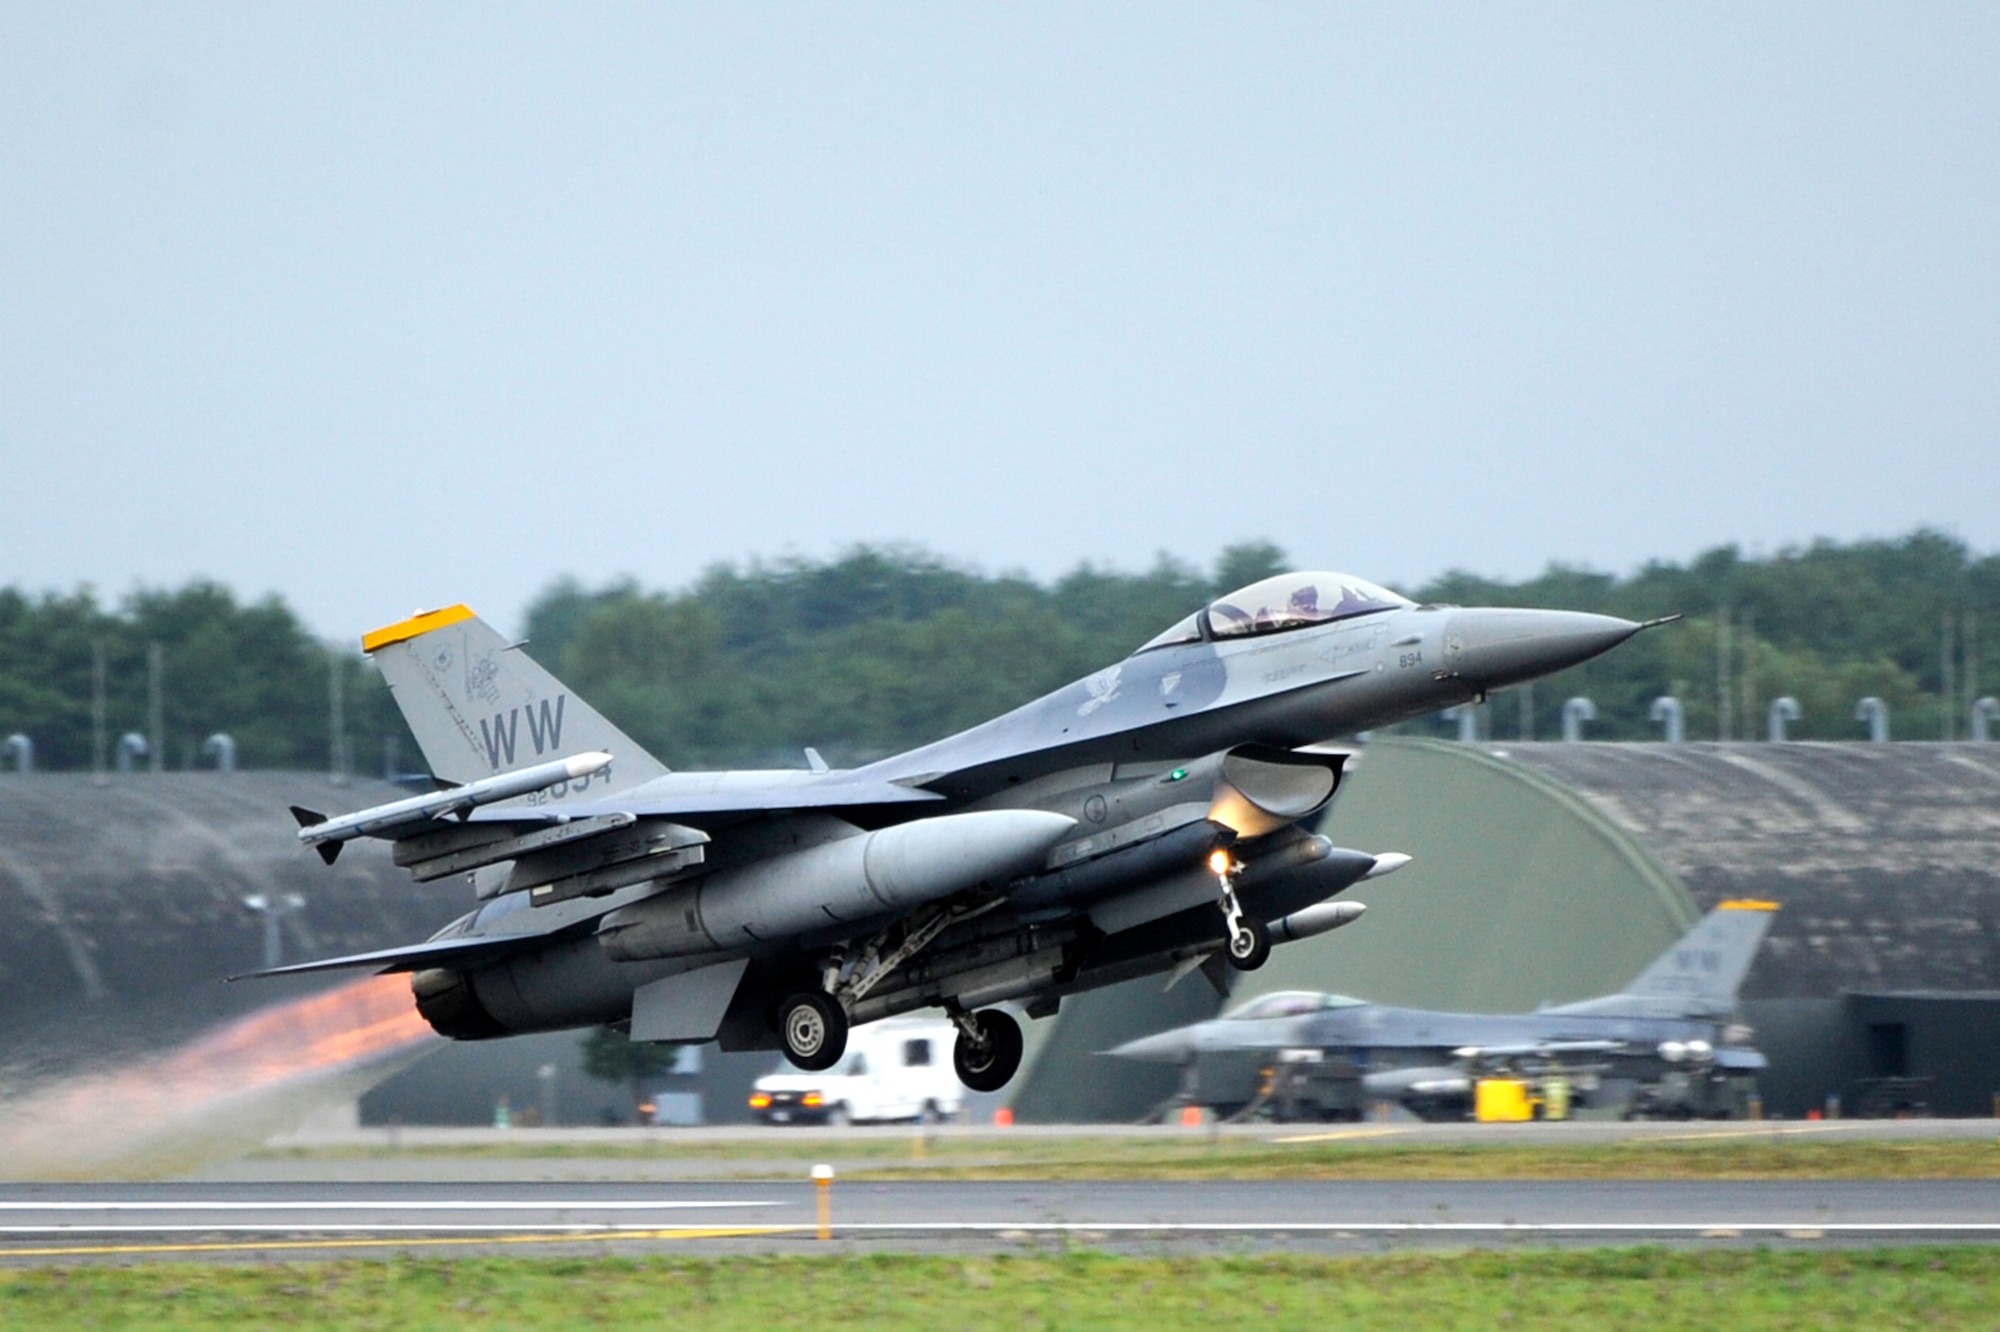 MISAWA AIR BASE, Japan – An F-16 Fighting Falcon from the 14th Fighter Squadron takes off during Operational Readiness Exercise at Misawa Air Base, Japan, Oct. 7, 2013. On average, more than 40 aircraft take off daily during the ORE to practice suppression of enemy air defenses and to provide a quick reaction capability to the Pacific Command theater. (U.S. Air Force Staff Sgt. Tong Duong/ Released)